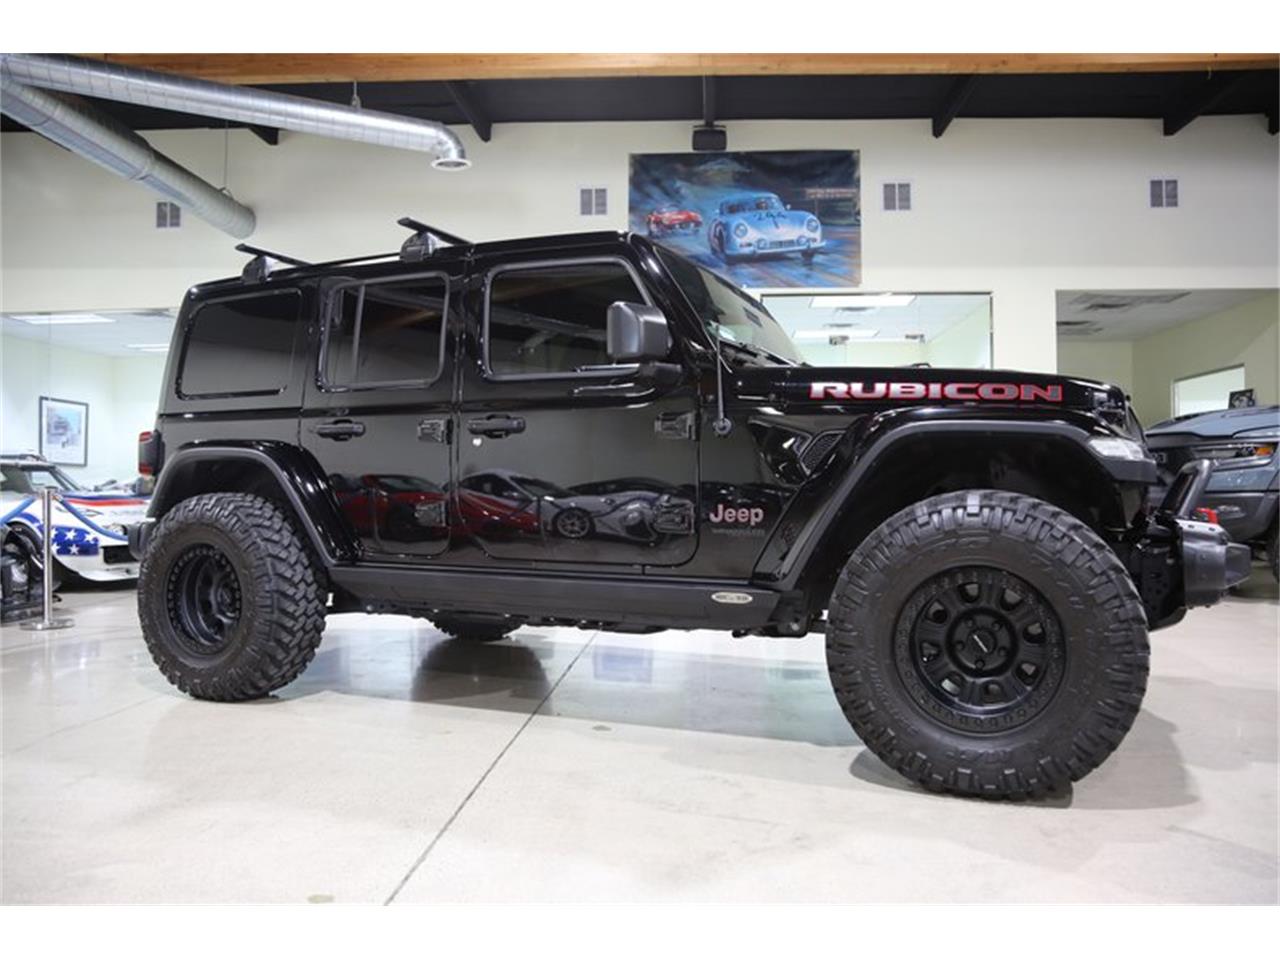 for sale 2020 jeep wrangler in chatsworth, california cars - chatsworth, ca at geebo